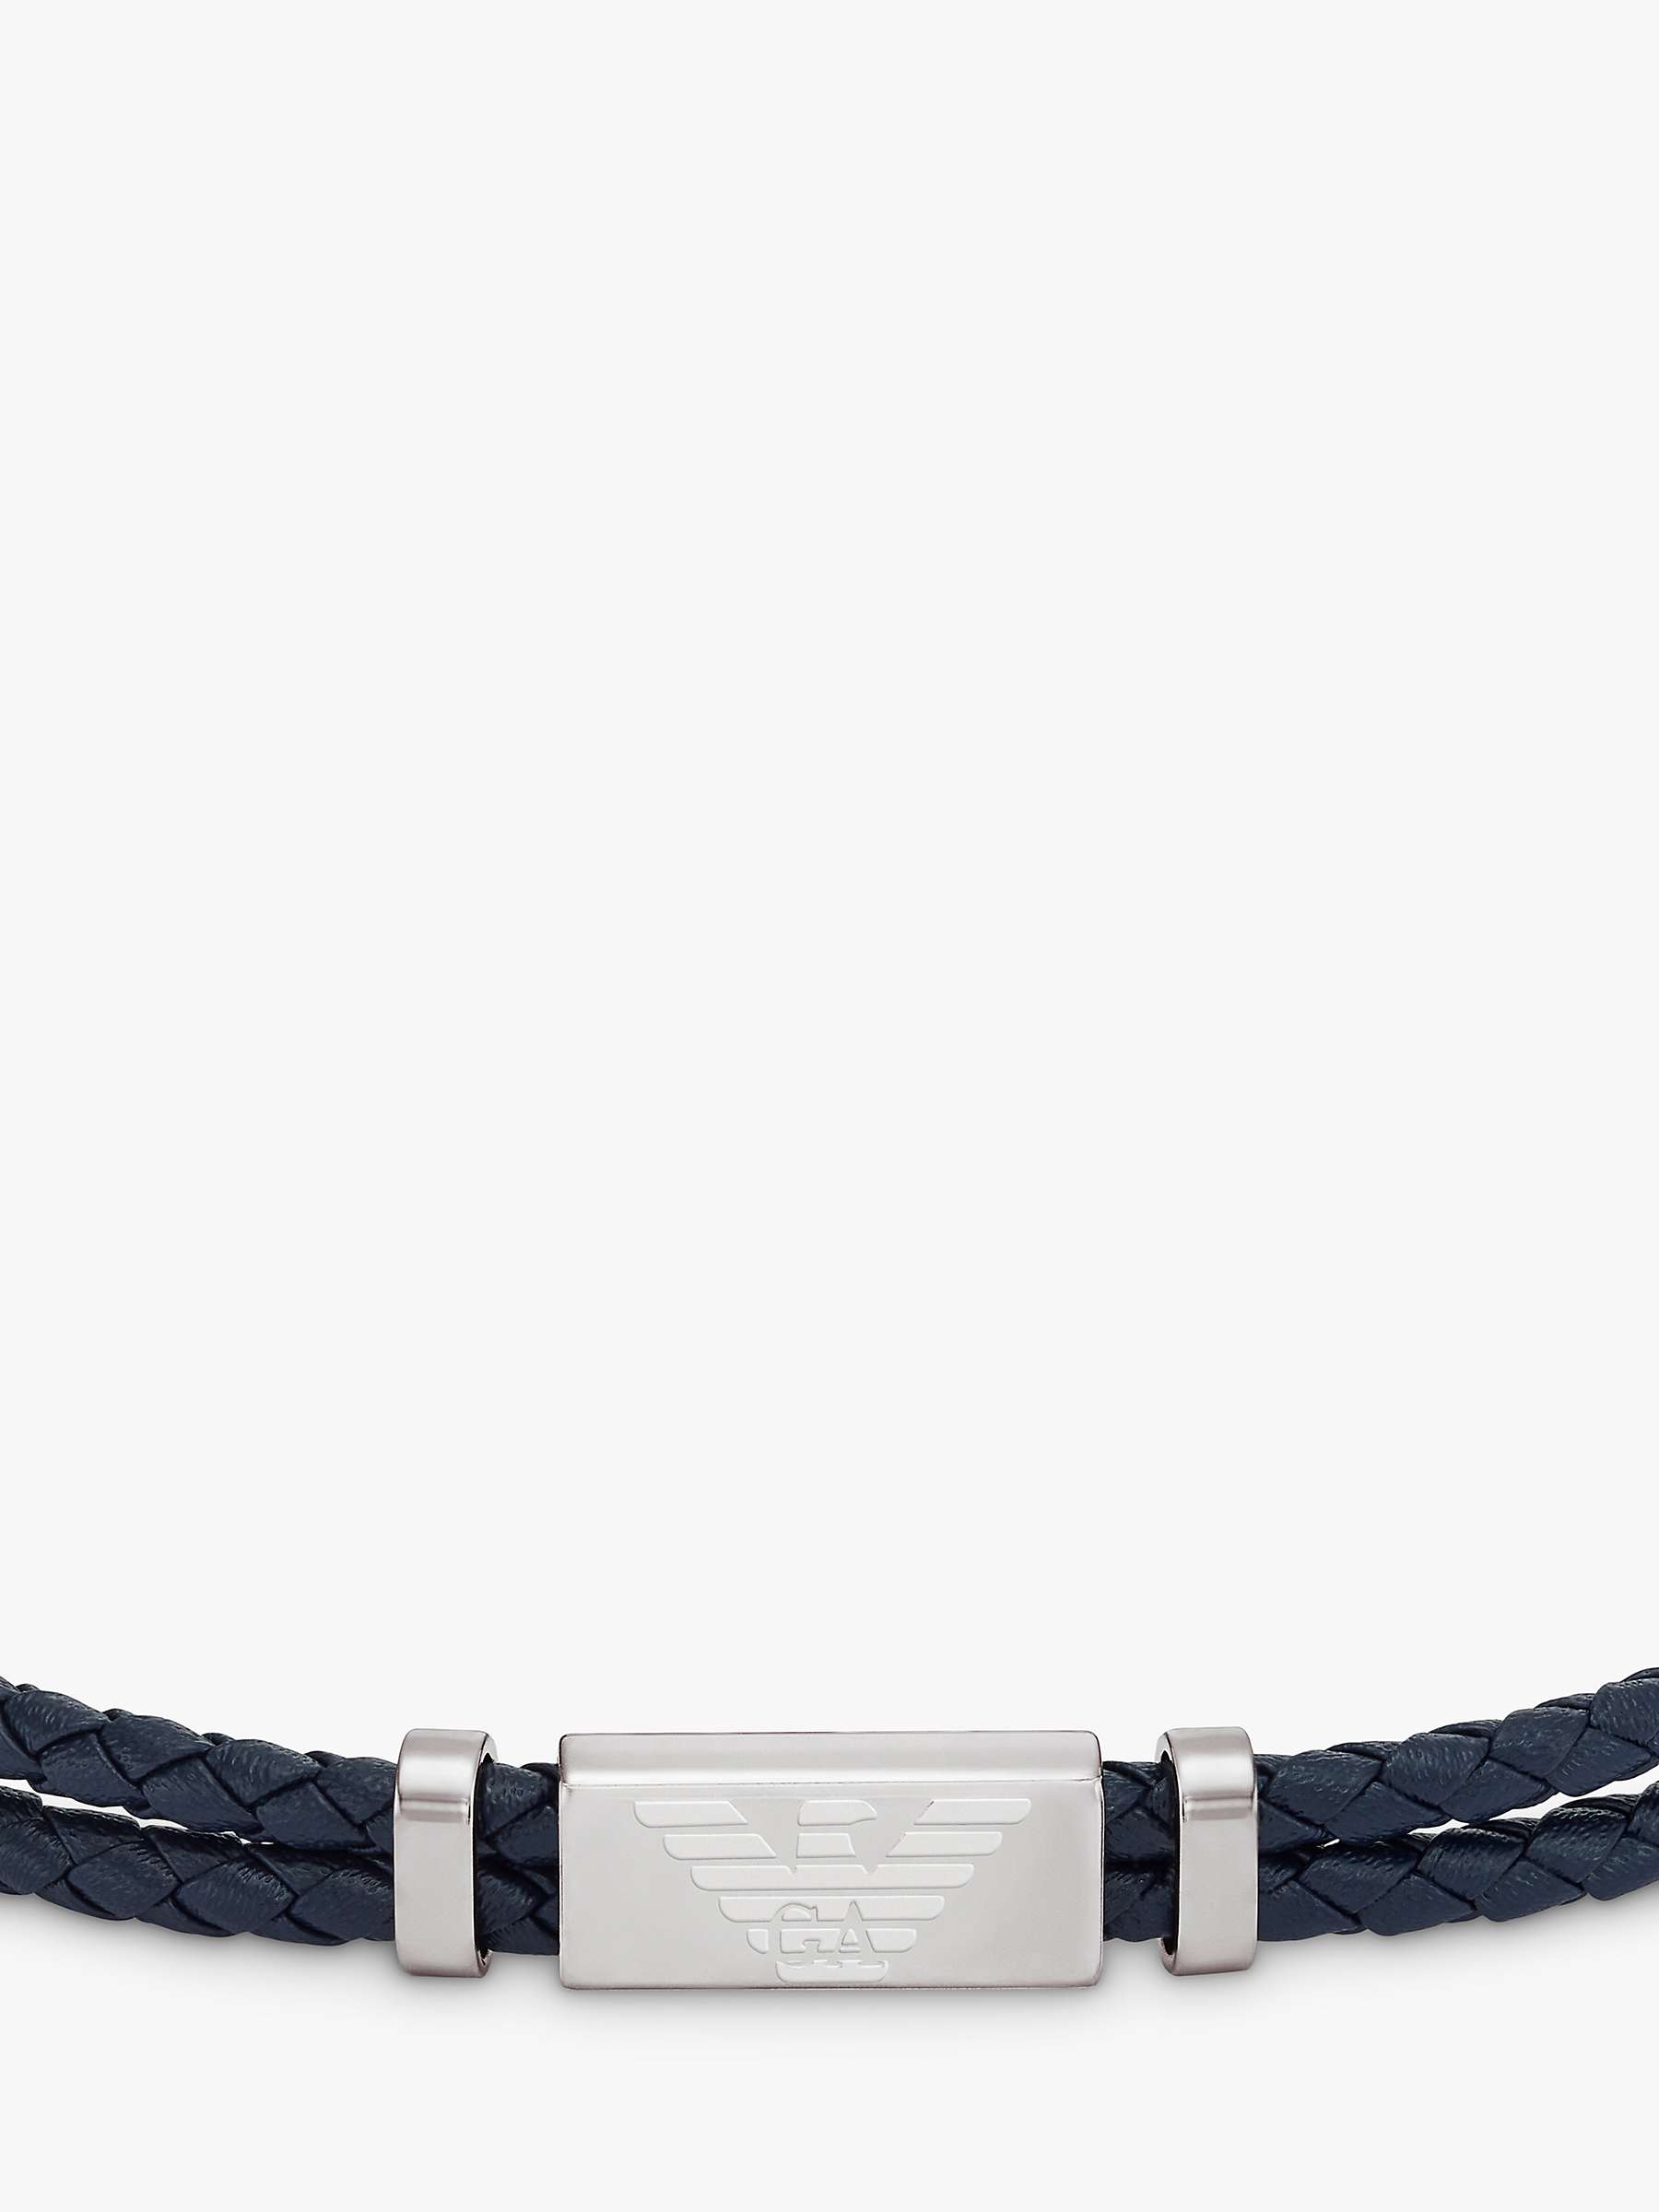 Buy Emporio Armani Men's ID Leather Braided Cord Bracelet, Silver/Blue Online at johnlewis.com